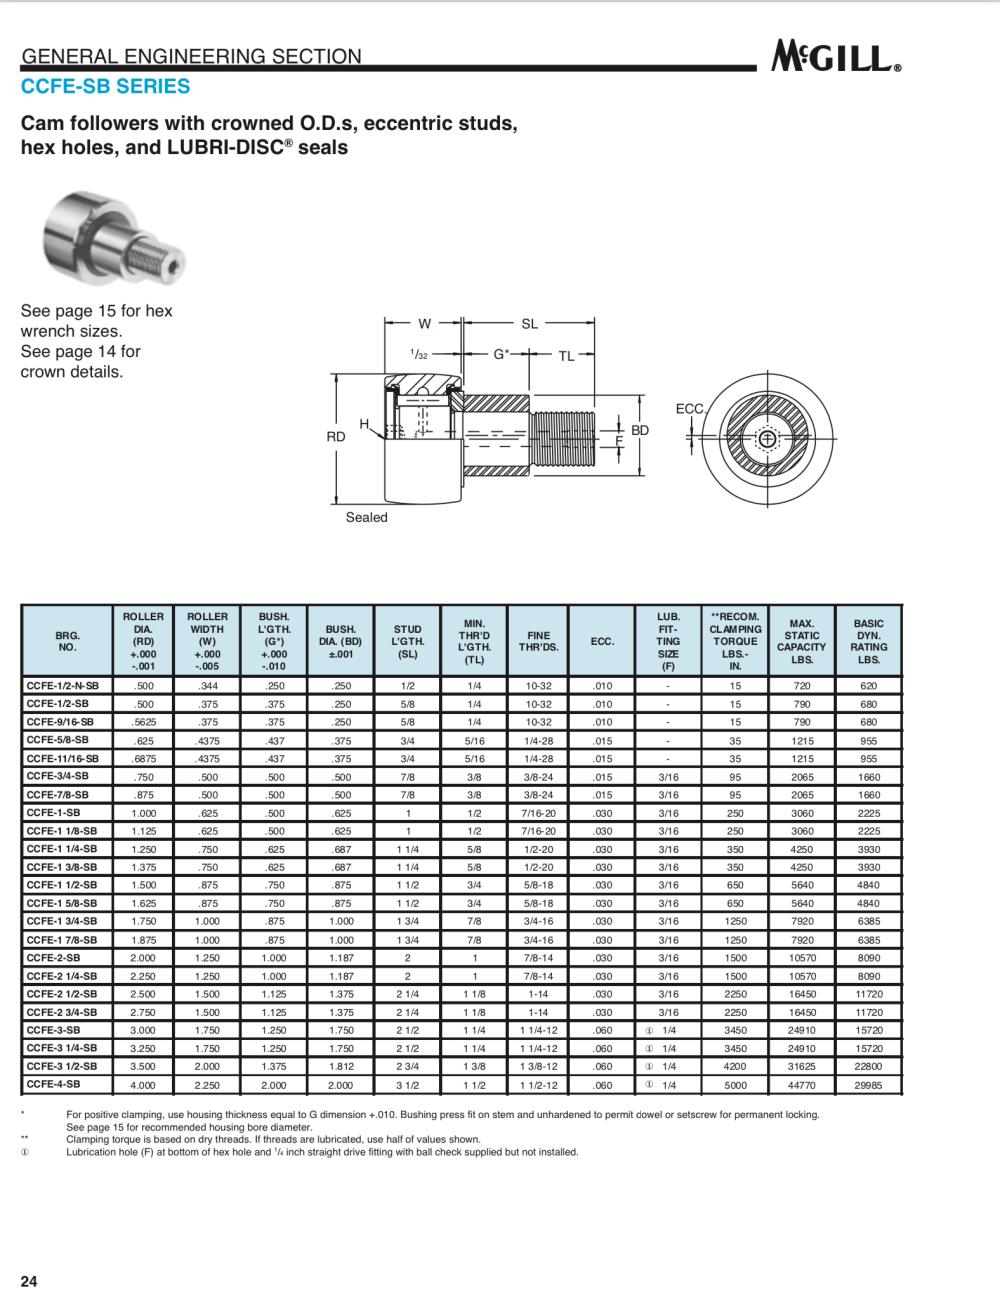 CCFE 1 SB ; CF SERIES 1" Roller Diameter; 5/8" Roller Width; Crowned Roller Surface Profile; 7/16" Stud Diameter; 7/16-20 Thread Size; Standard Stud with Eccentric Bushing Stud Profile; Sealed Enclosure; Needle Bearing; Yes Relubricatable; Yes Hex Socket